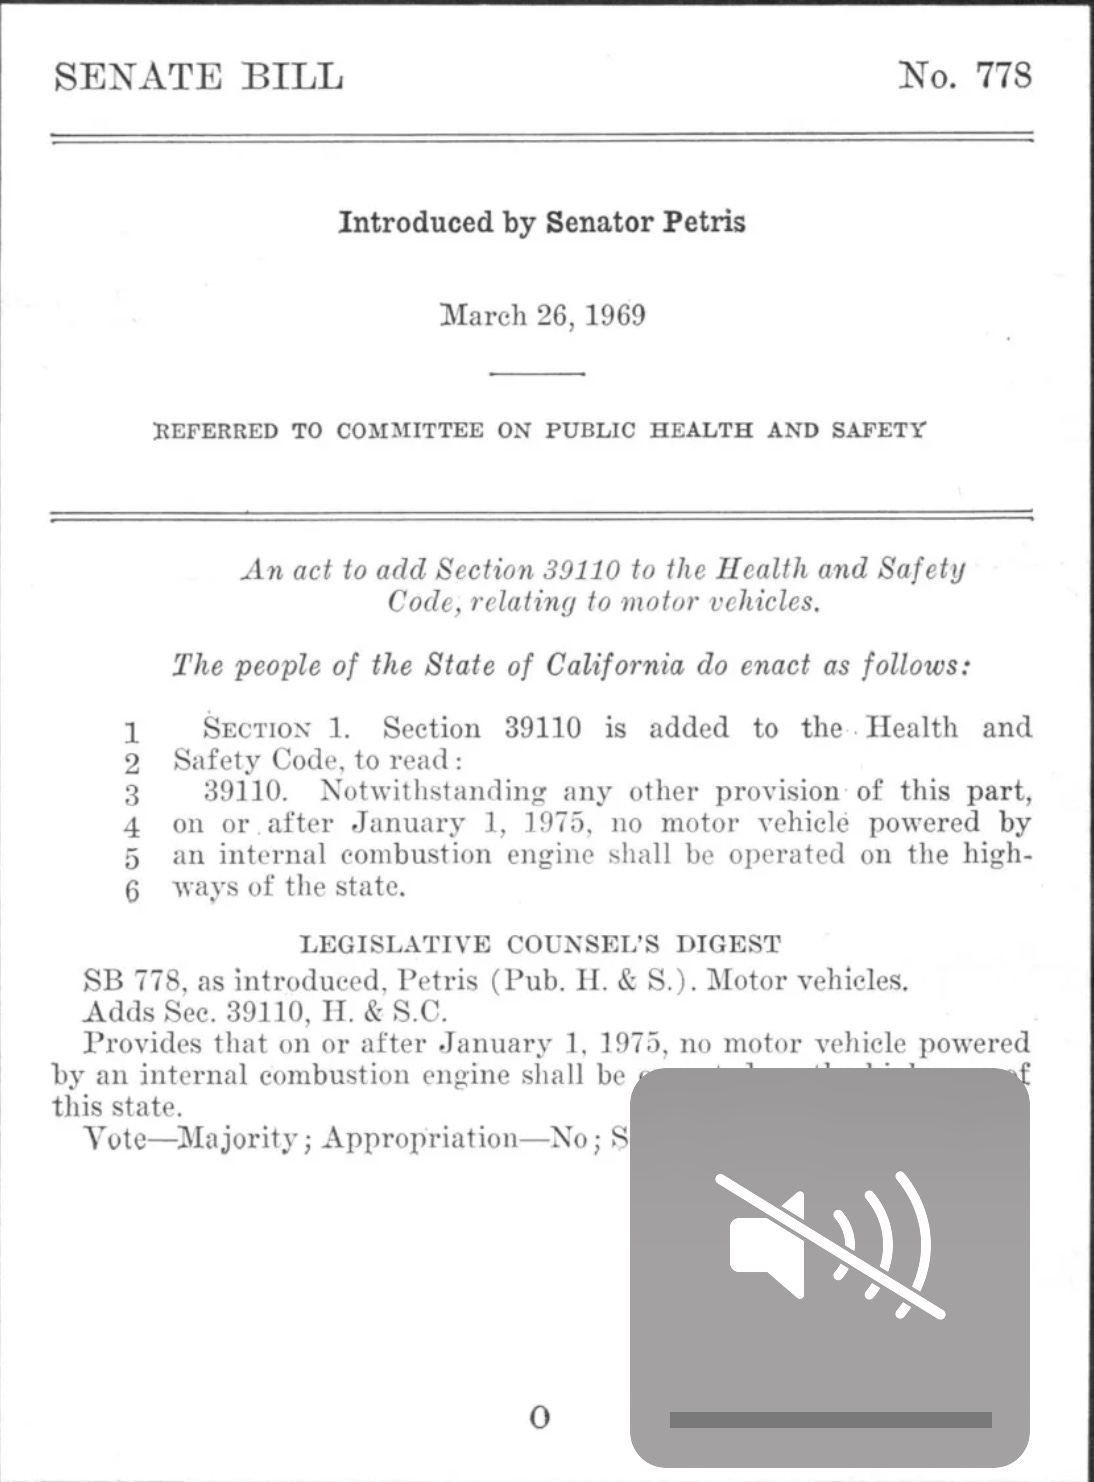 A screenshot of legislation introduced in 1969 that would ban internal combustion vehicles by 1975.